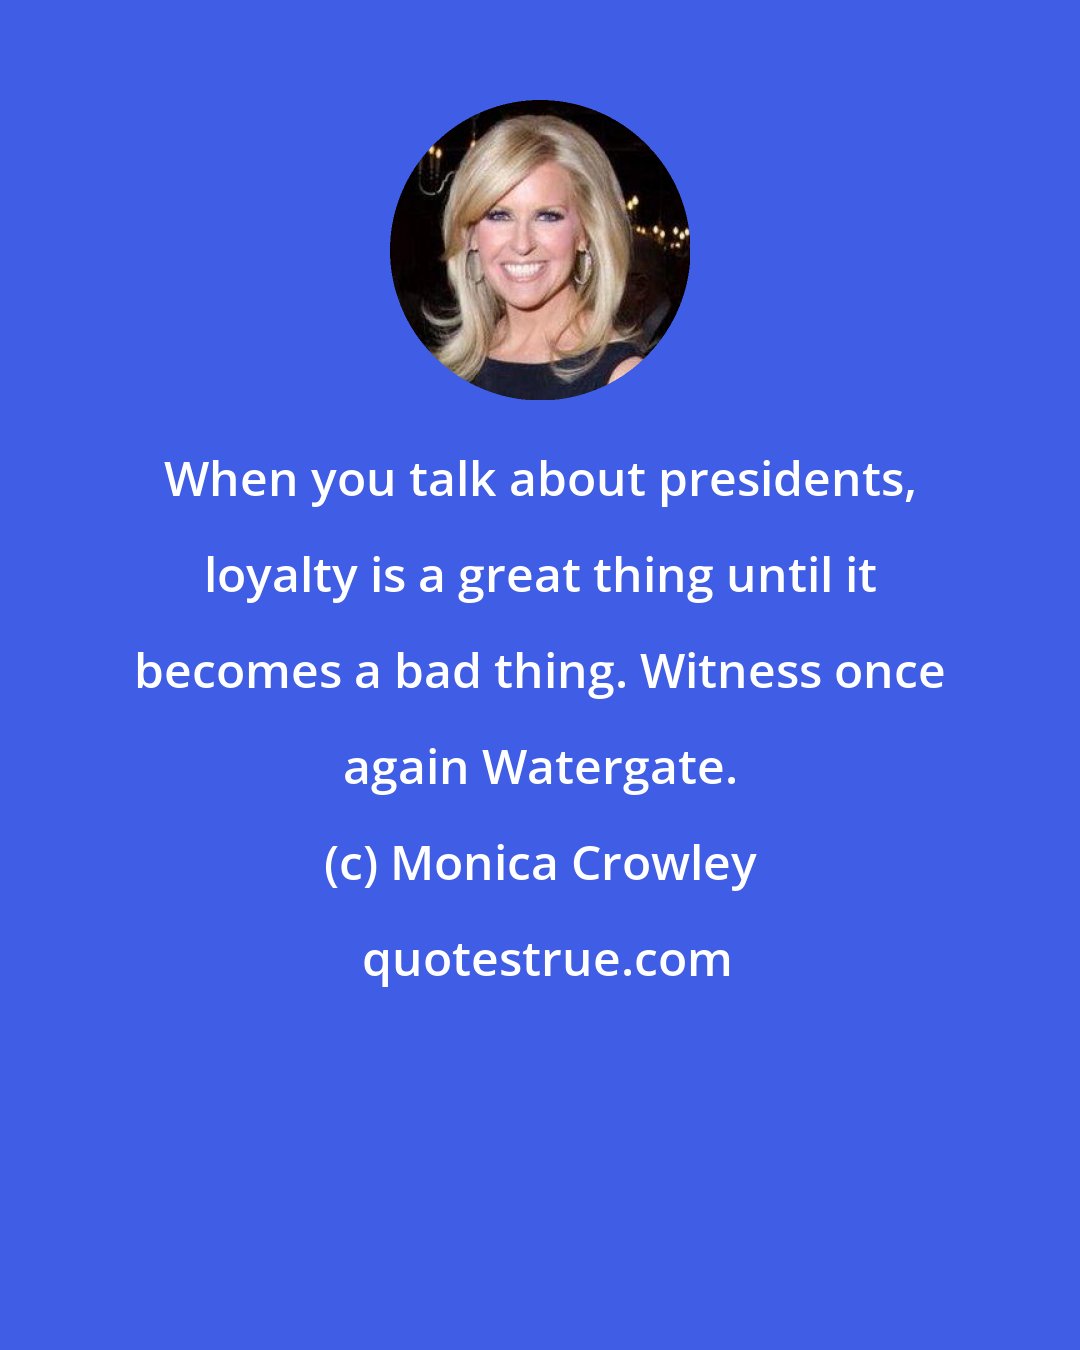 Monica Crowley: When you talk about presidents, loyalty is a great thing until it becomes a bad thing. Witness once again Watergate.